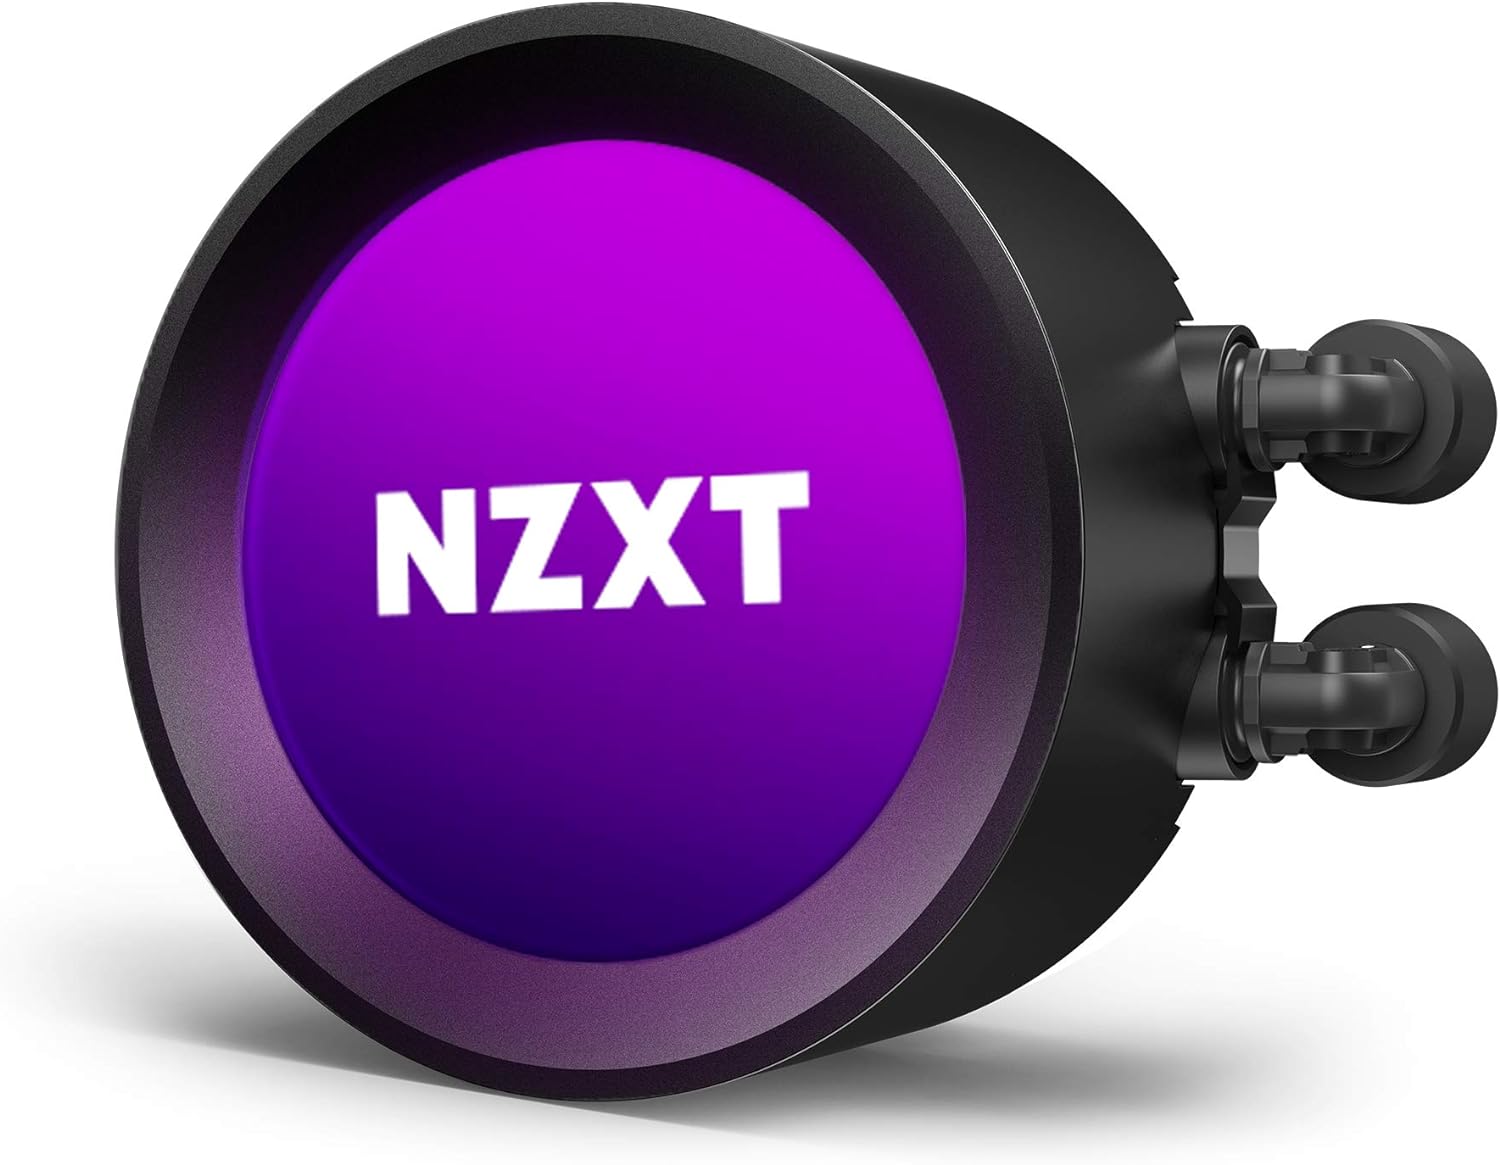 Intel & AMD socket compatibility for NZXT Kraken Z53 240mm AIO RGB CPU Cooler 0815671015181